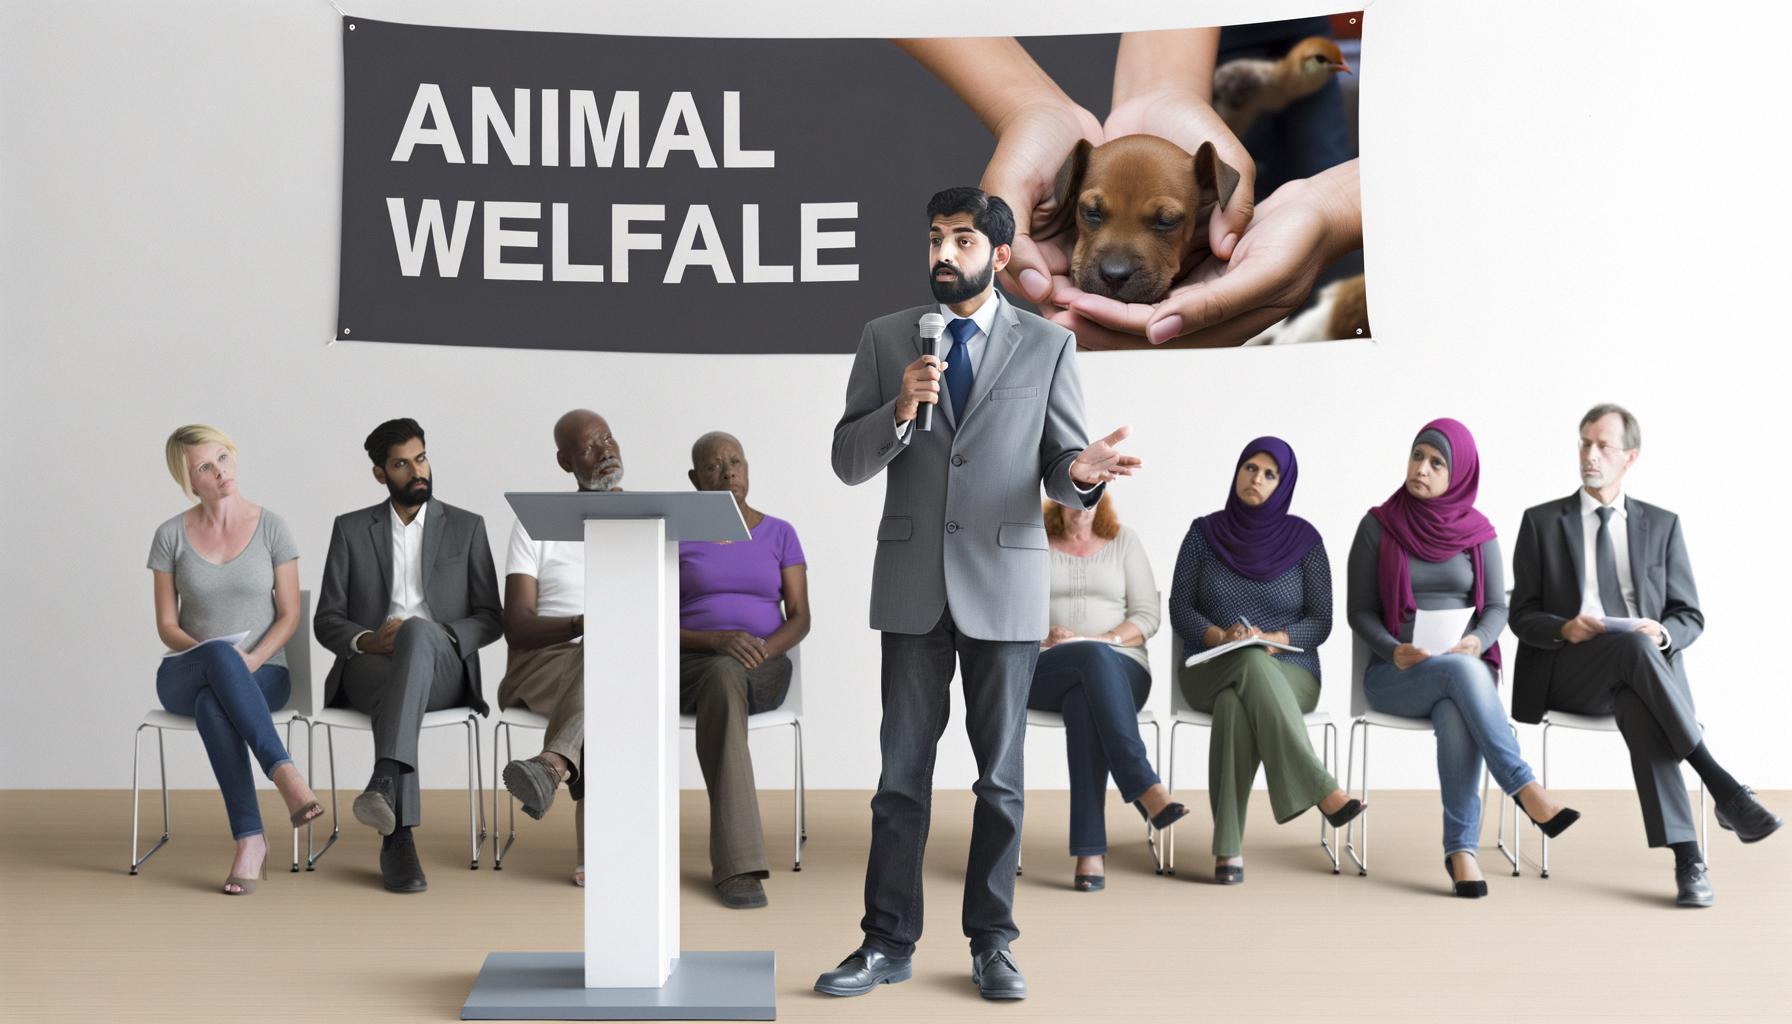 Animal welfare emerging as significant social and political issue Balanced News